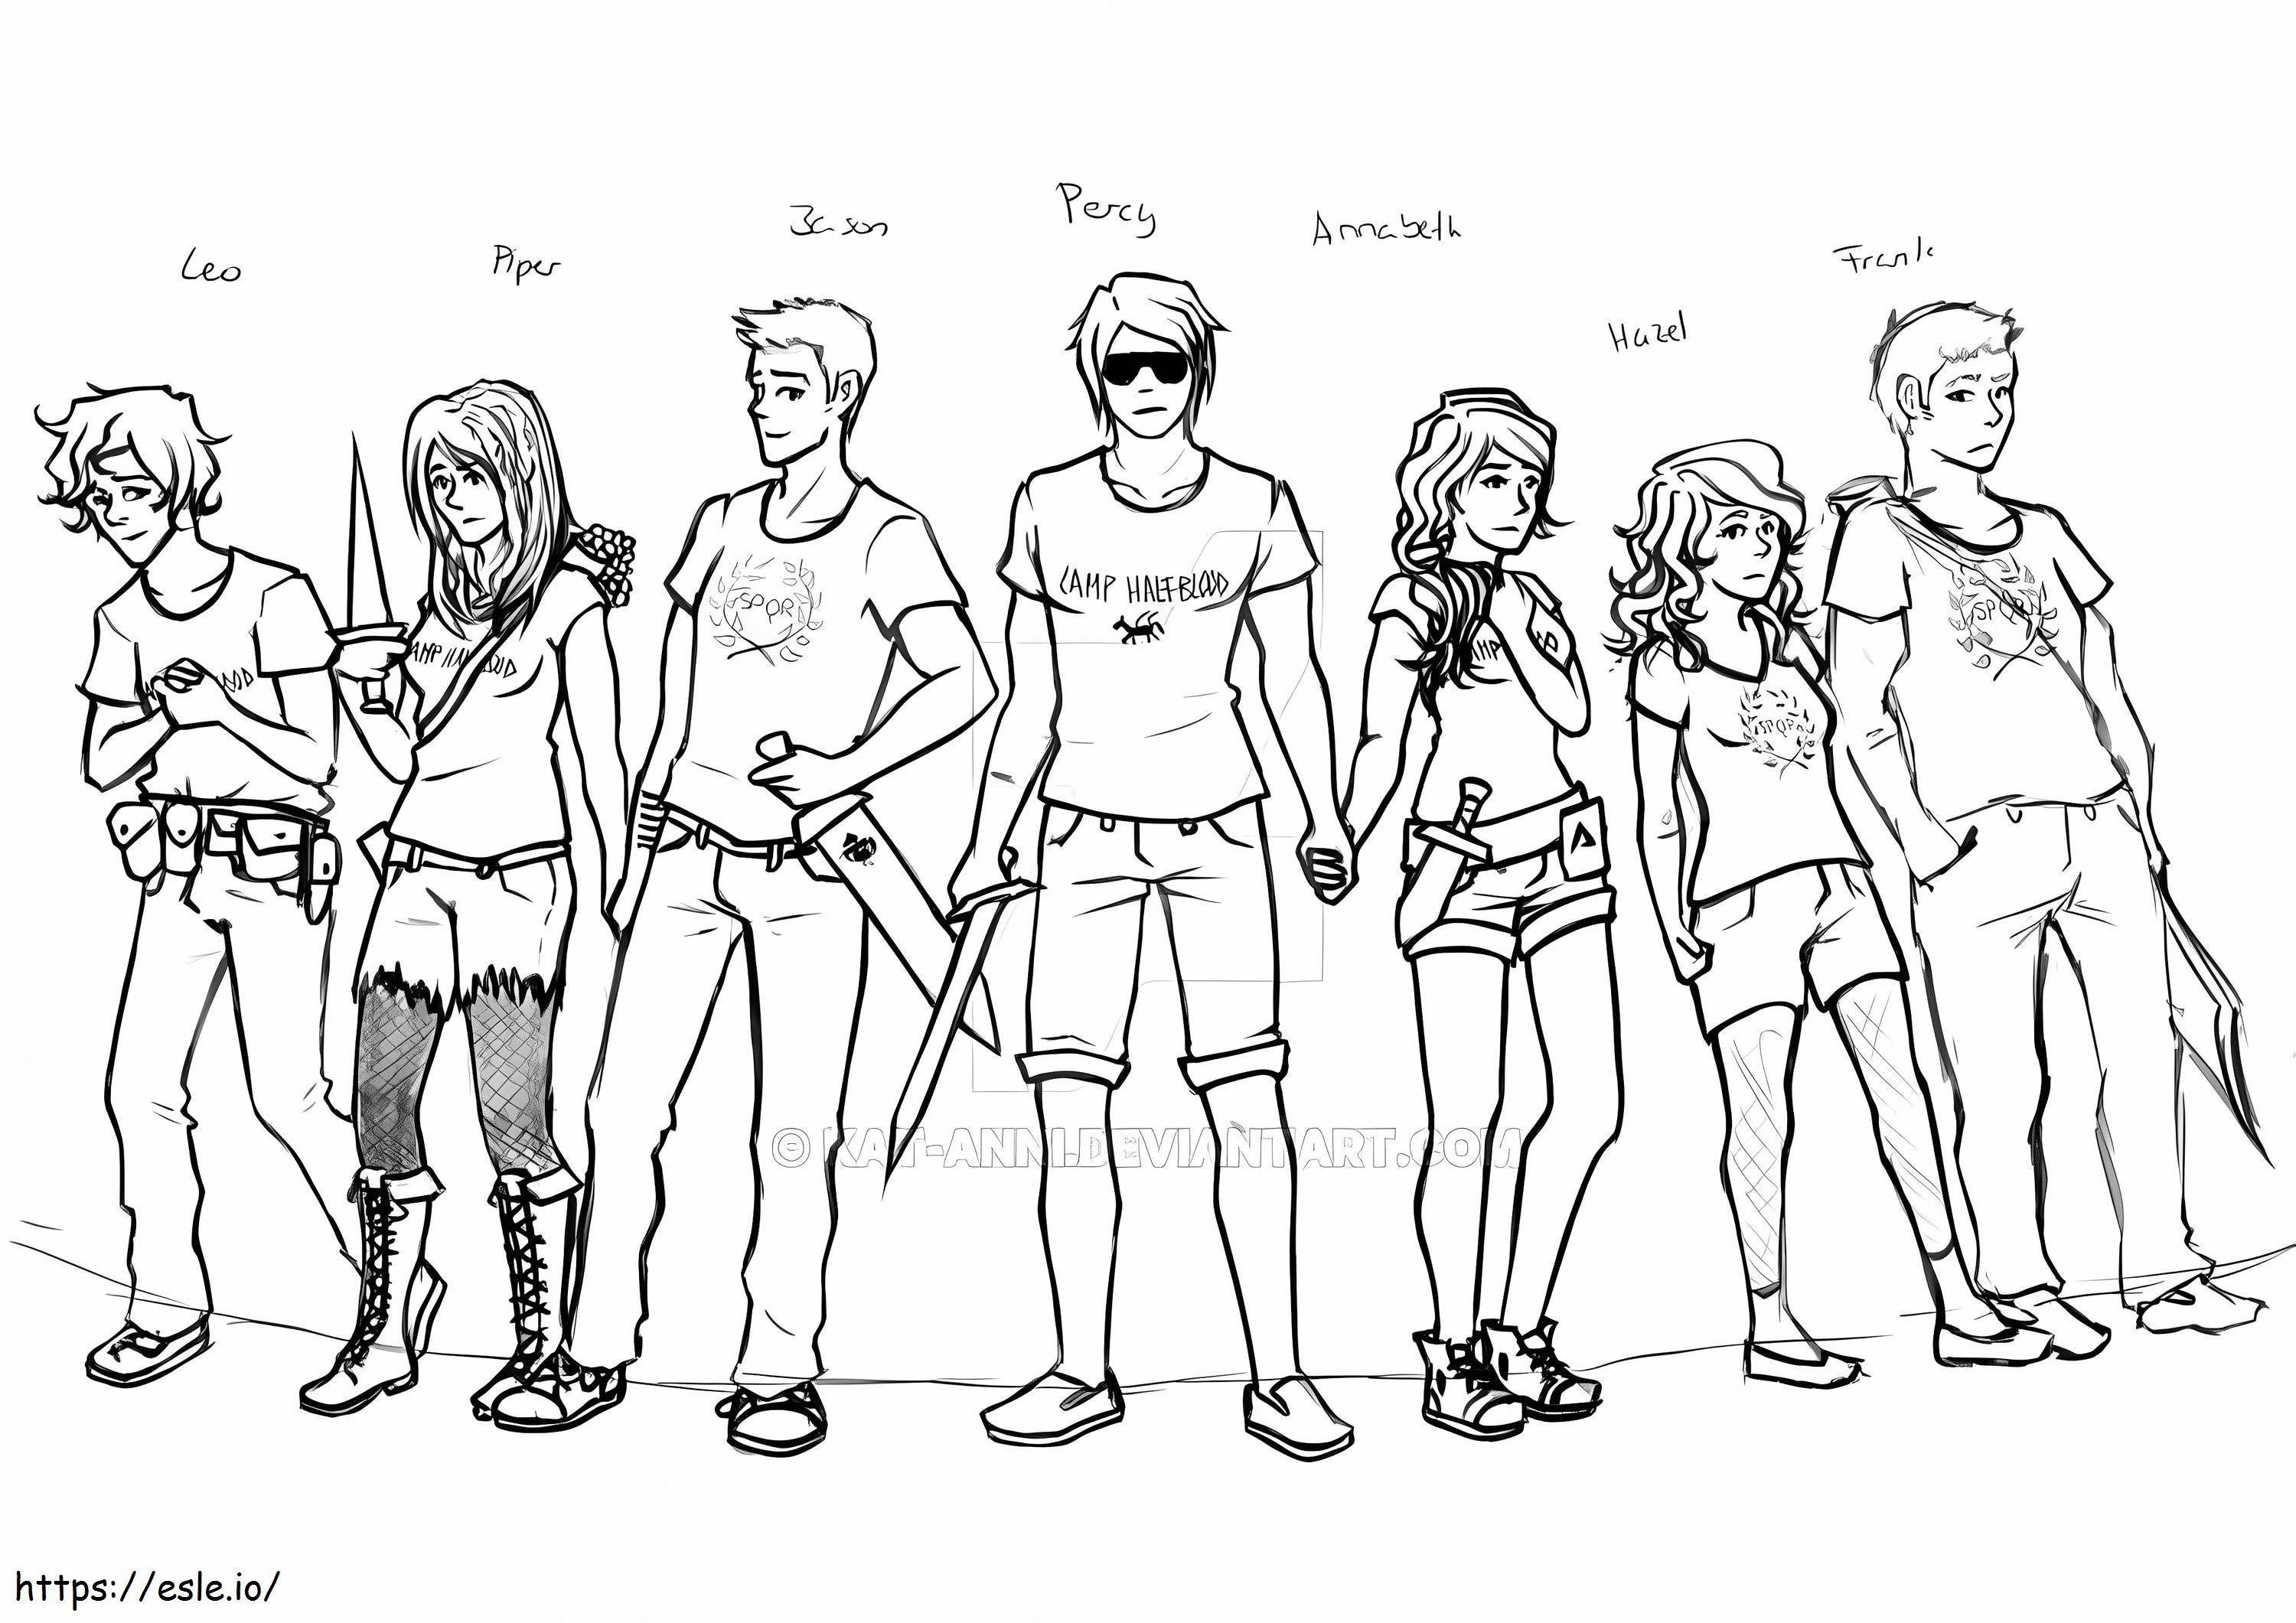 Percy Jackson And Friends coloring page